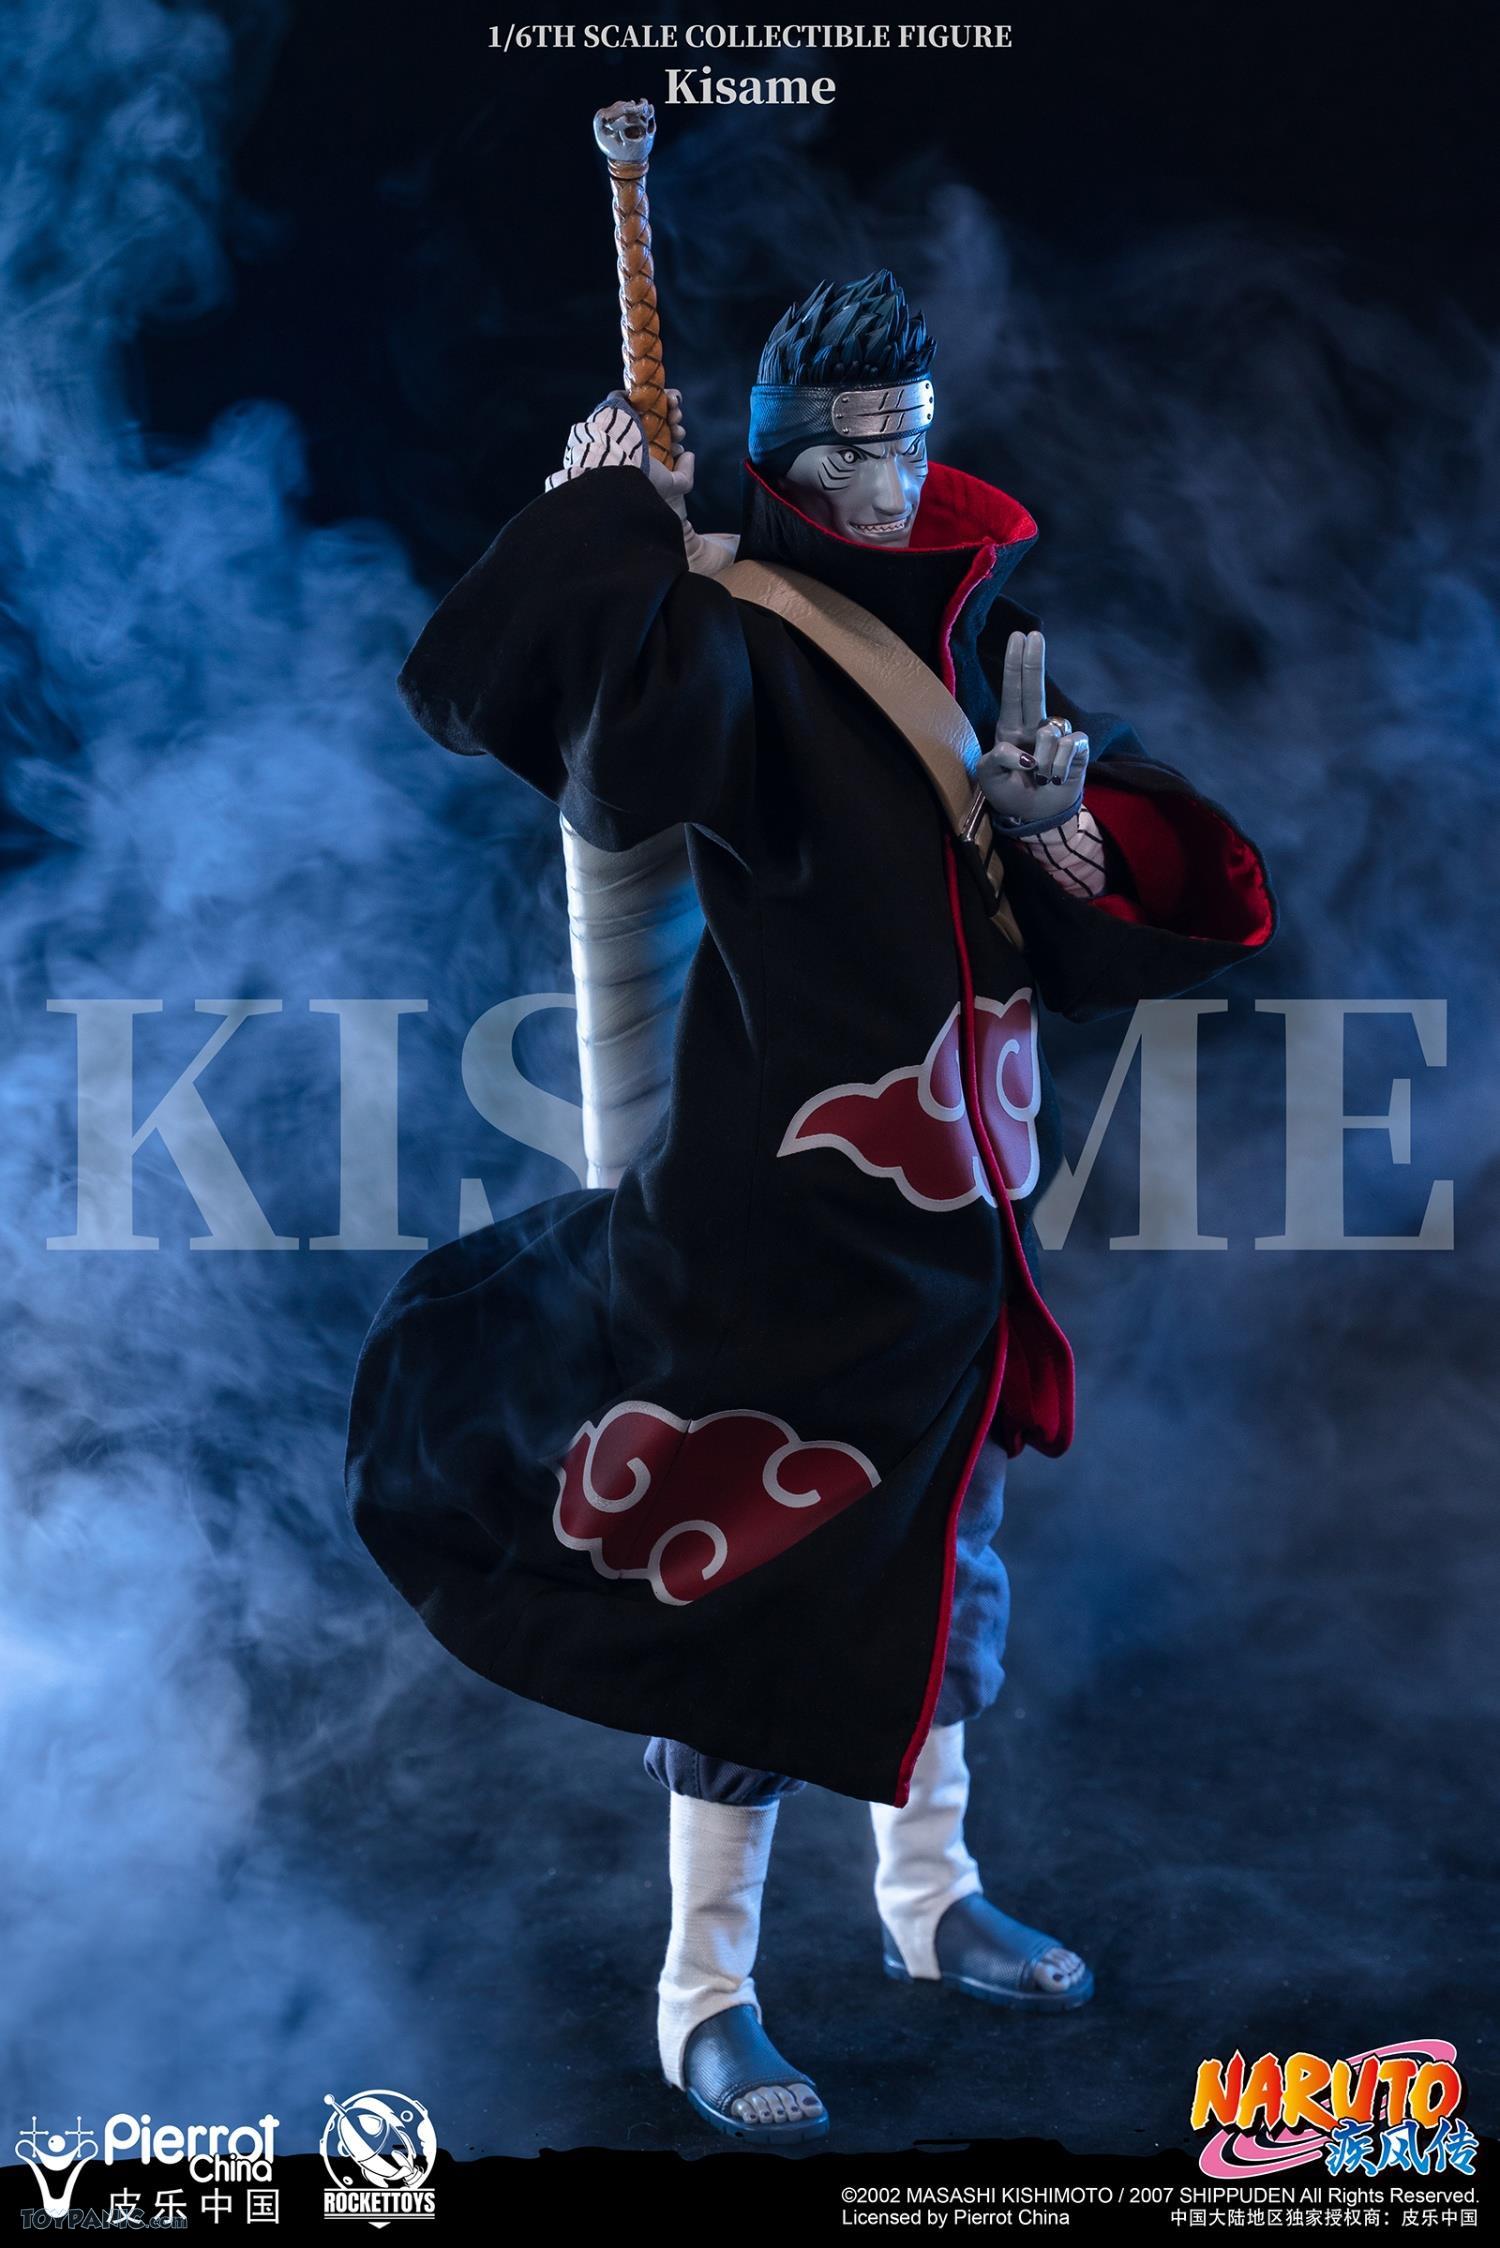 pierrot - NEW PRODUCT: Rocket Toys ROC-007 1/6 Scale Kisame 221202460437PM_9339184